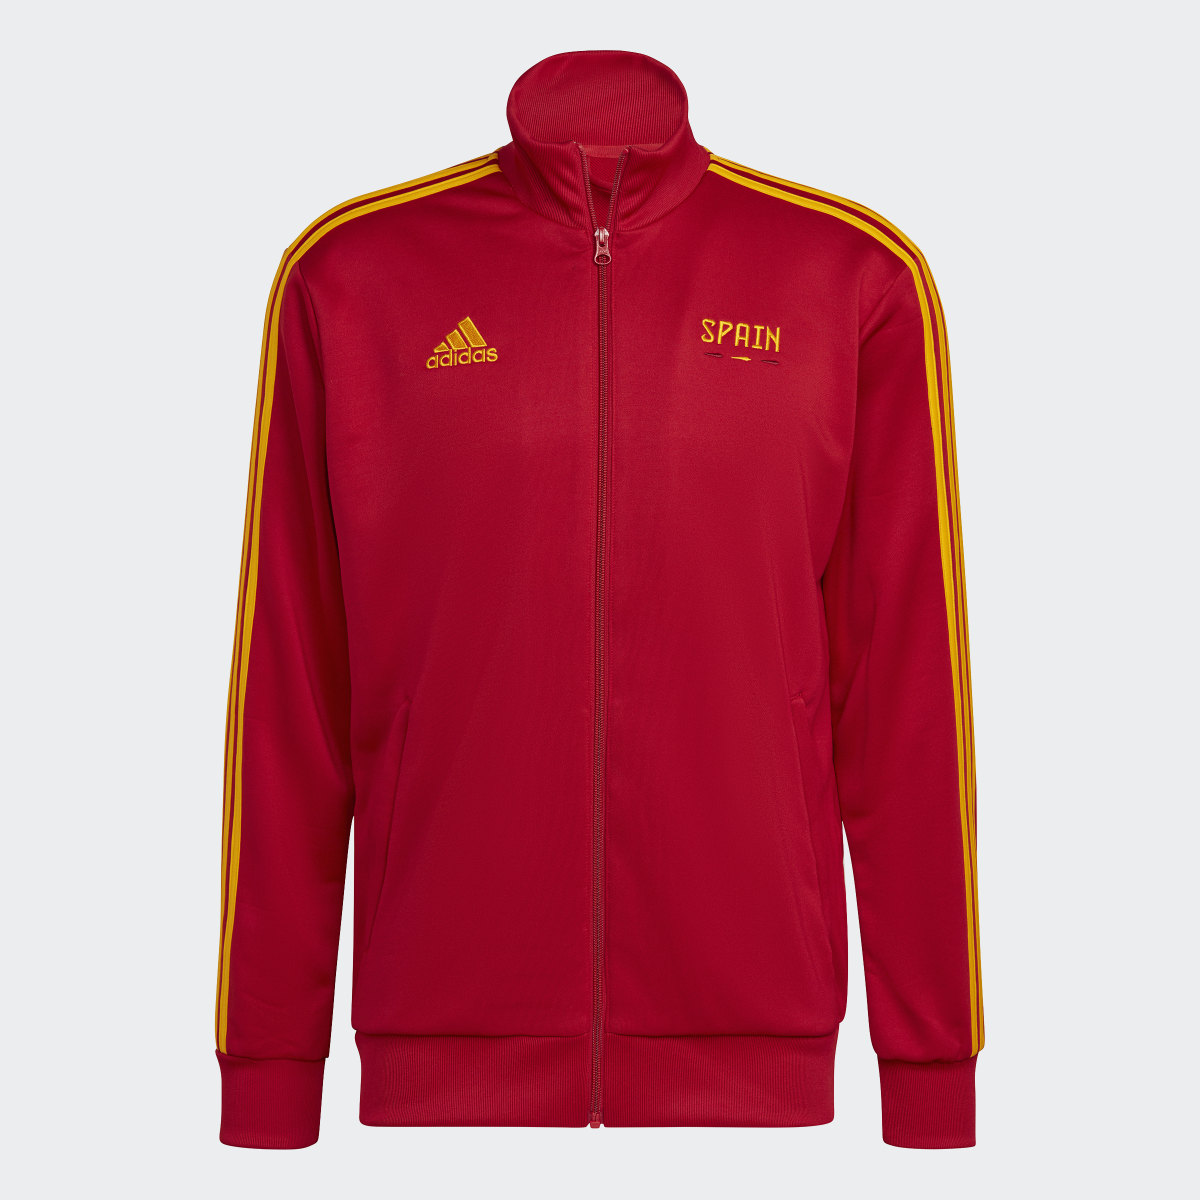 Adidas FIFA World Cup 2022™ Spain Track Top. 5